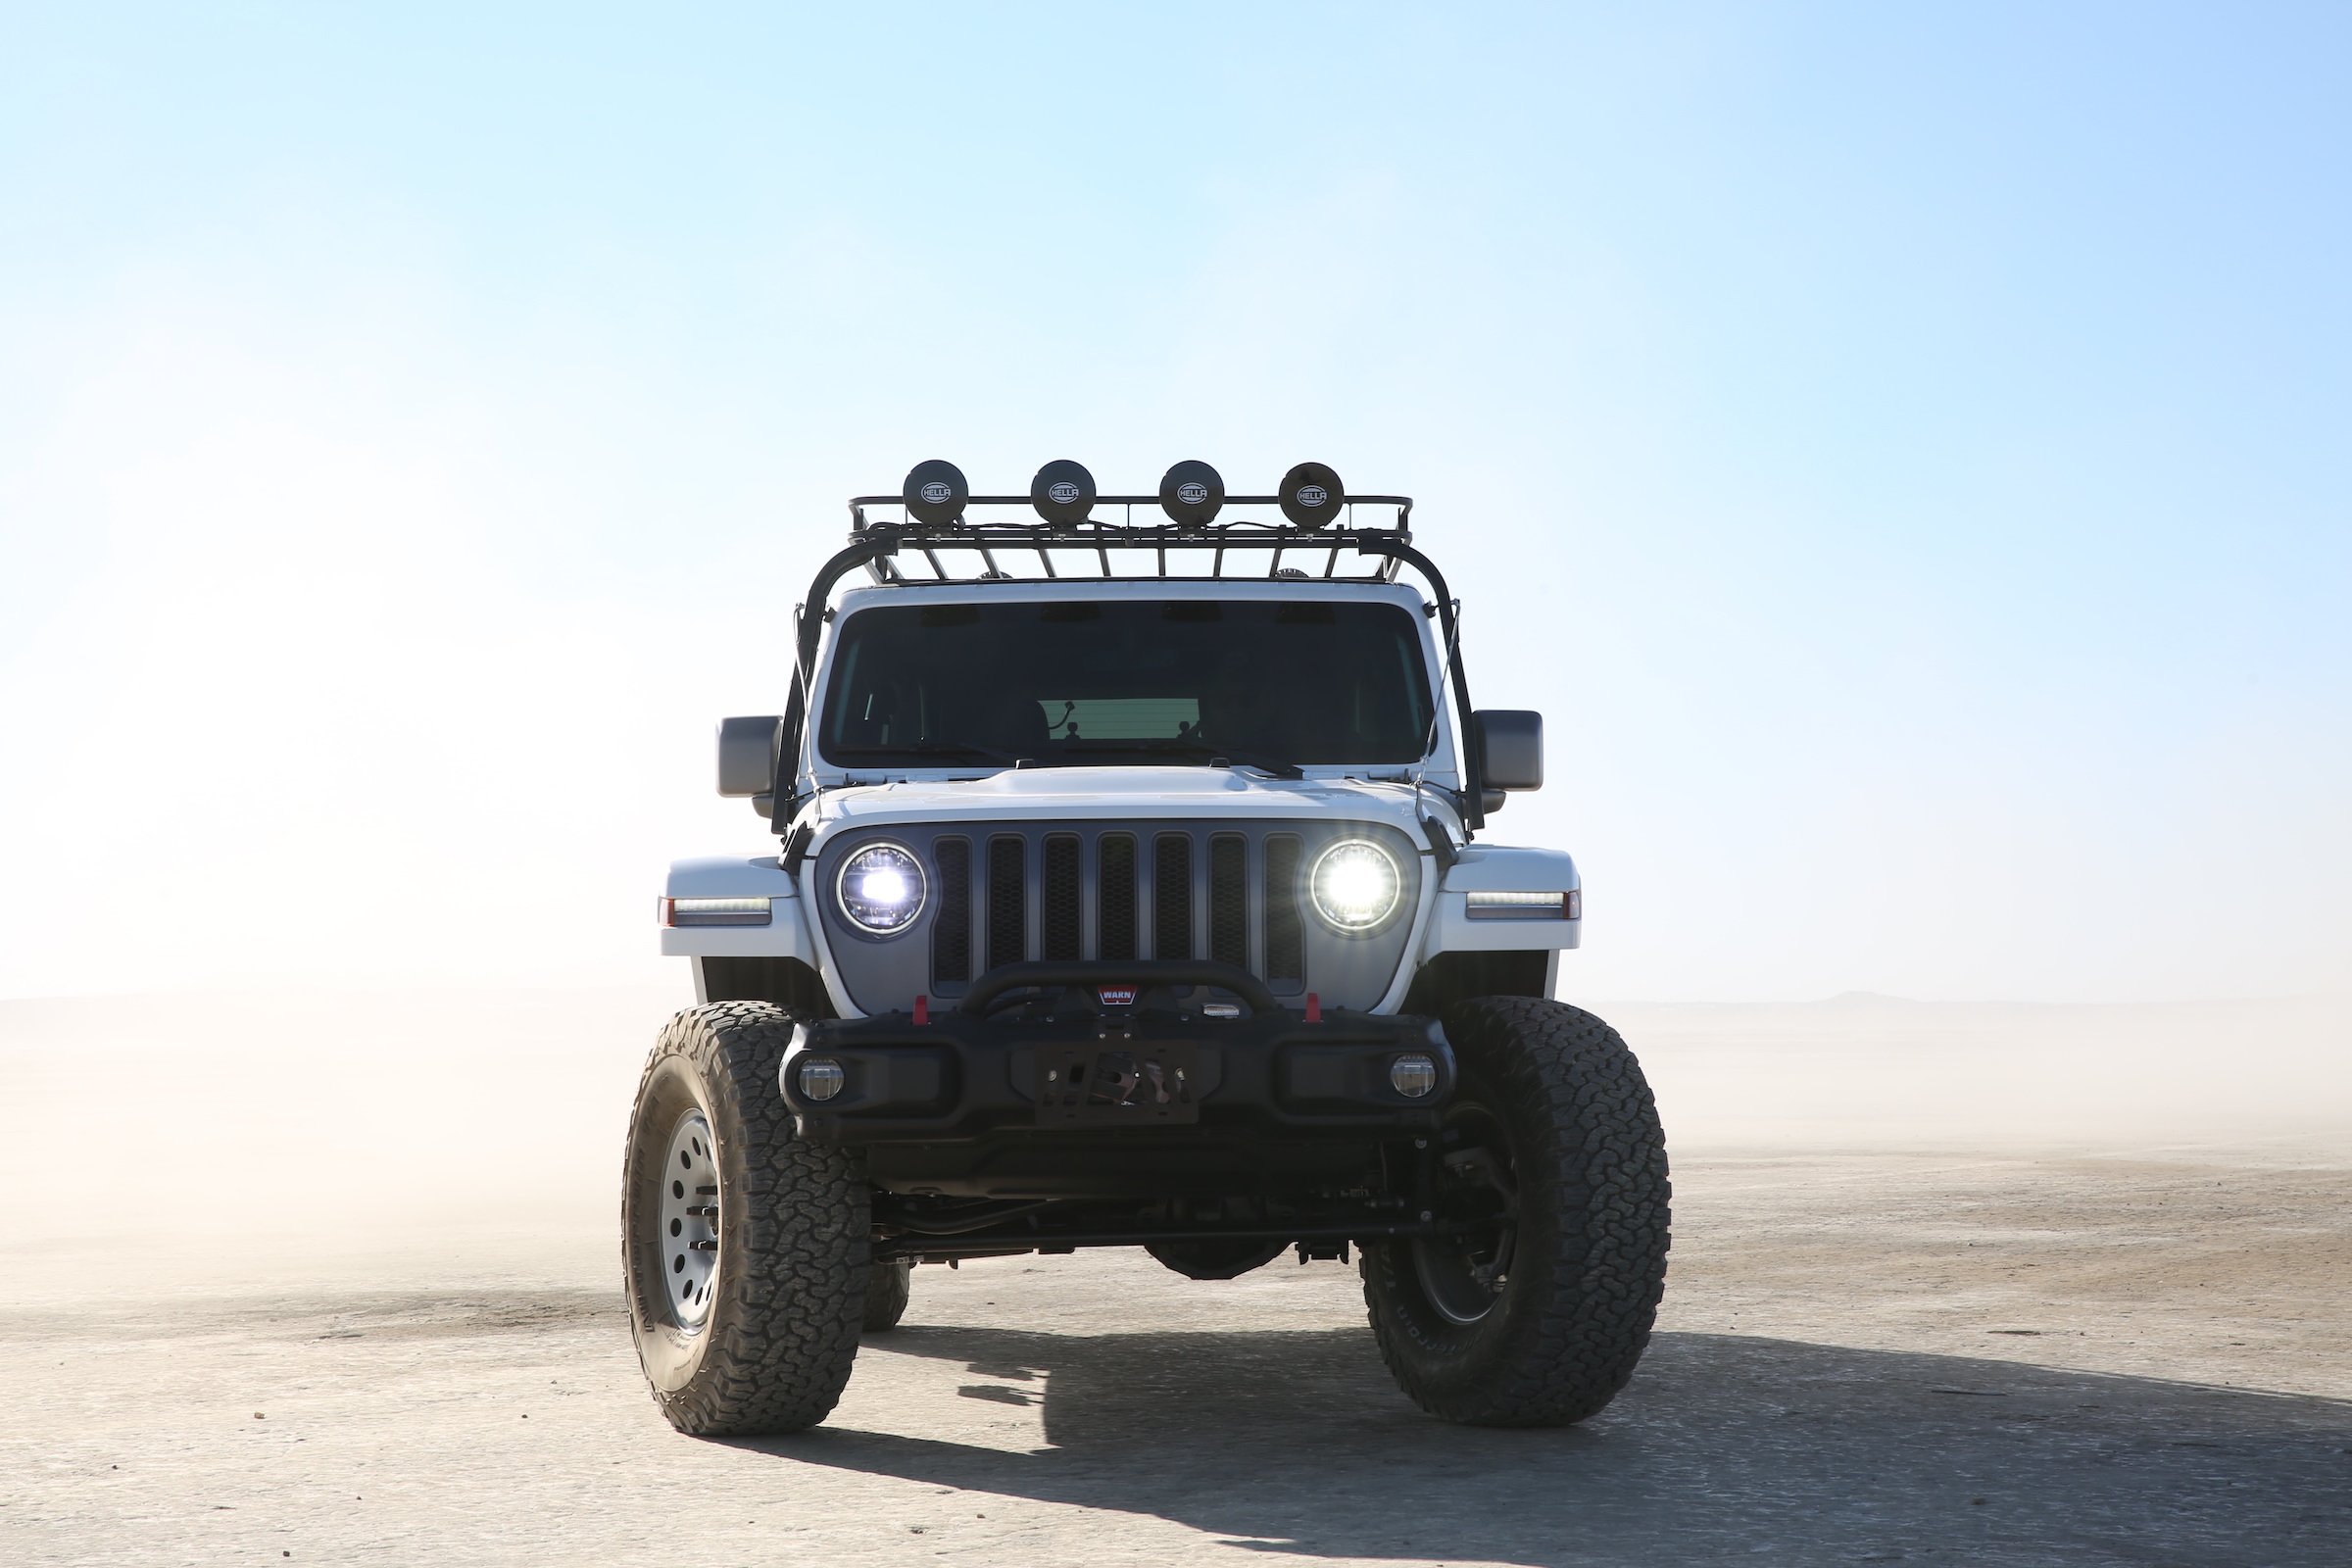 The True North Edition Jeep Wrangler by True North Collections